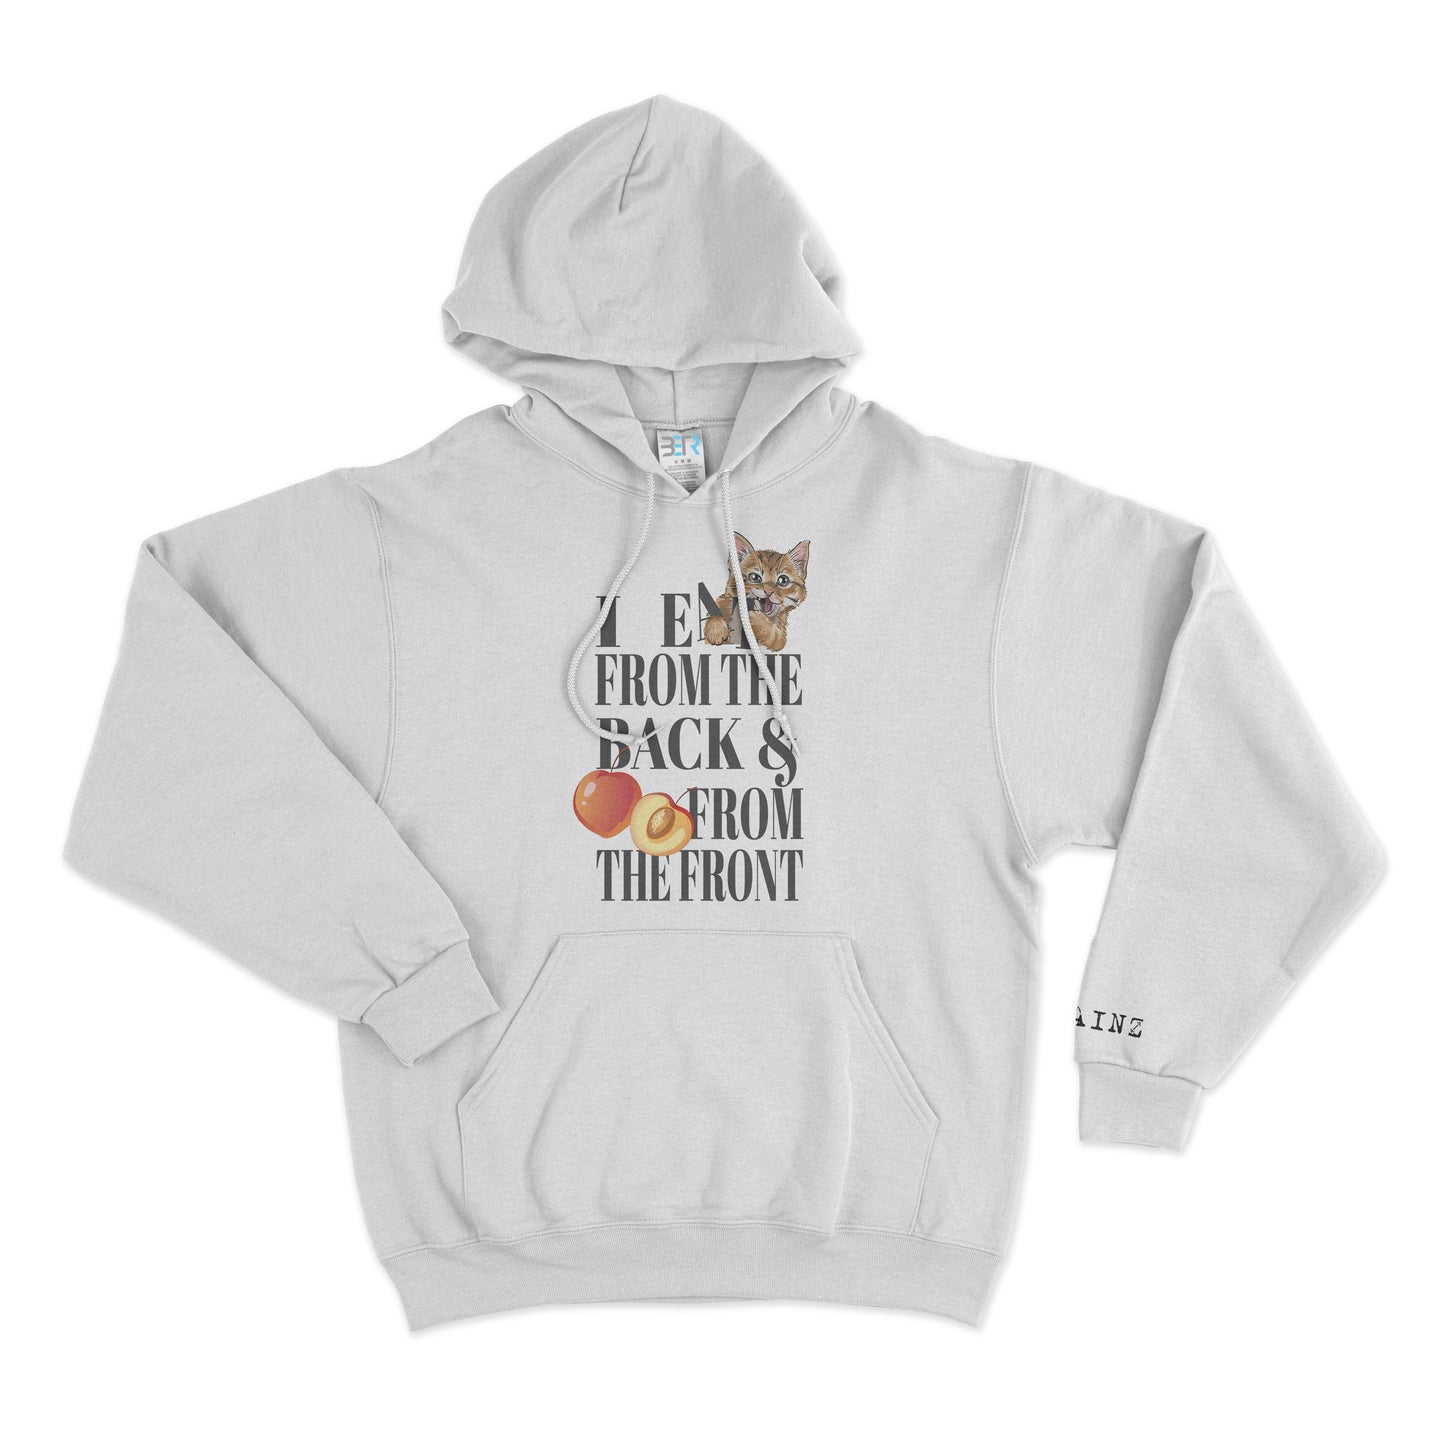 From the Back Hoodie